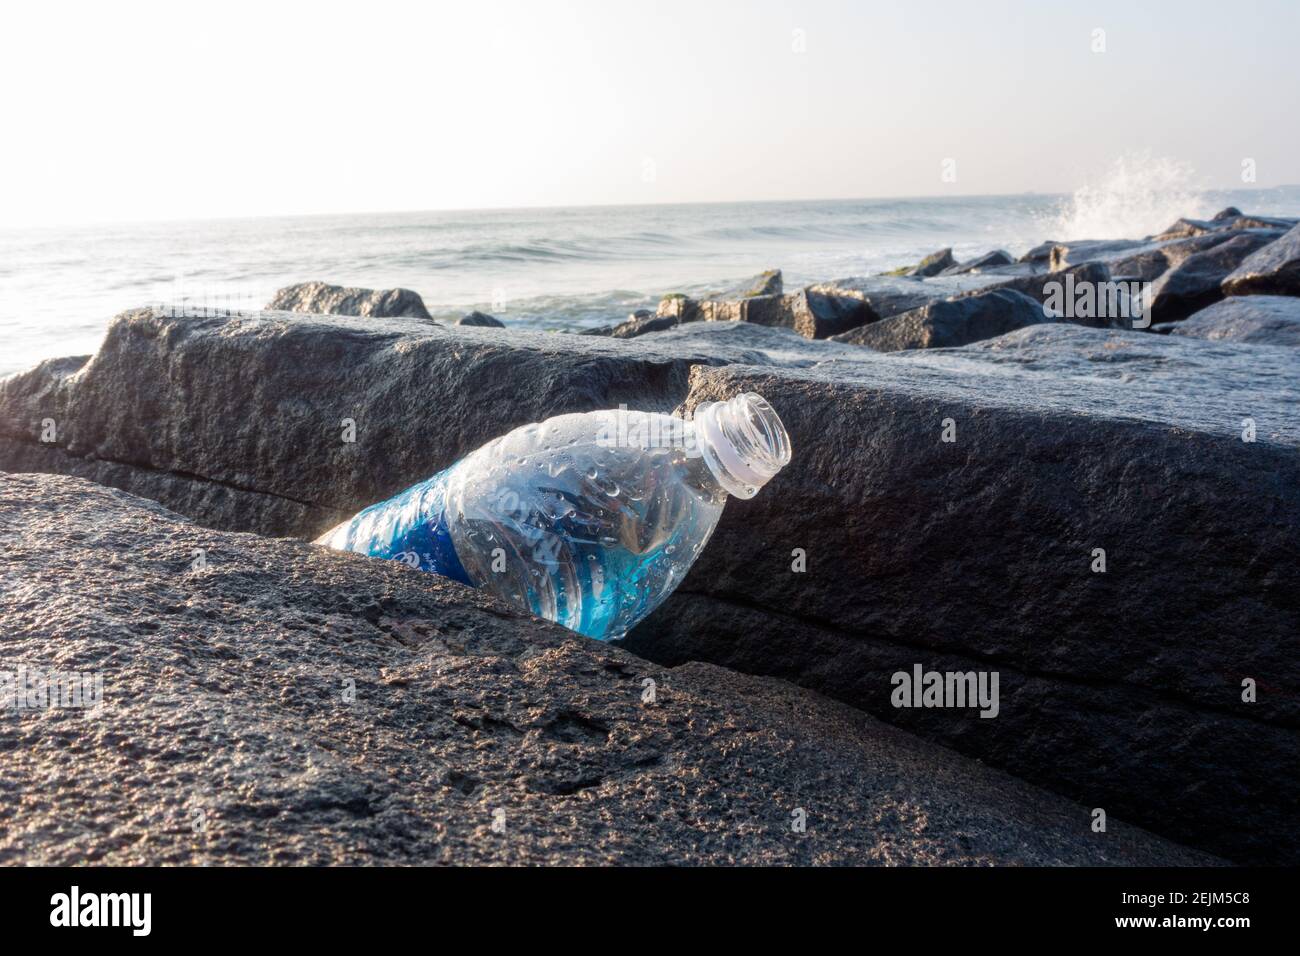 https://c8.alamy.com/comp/2EJM5C8/plastic-pollution-with-single-use-plastic-bottles-and-other-junk-left-by-visitors-at-pondicherry-beach-in-tamil-nadu-india-2EJM5C8.jpg